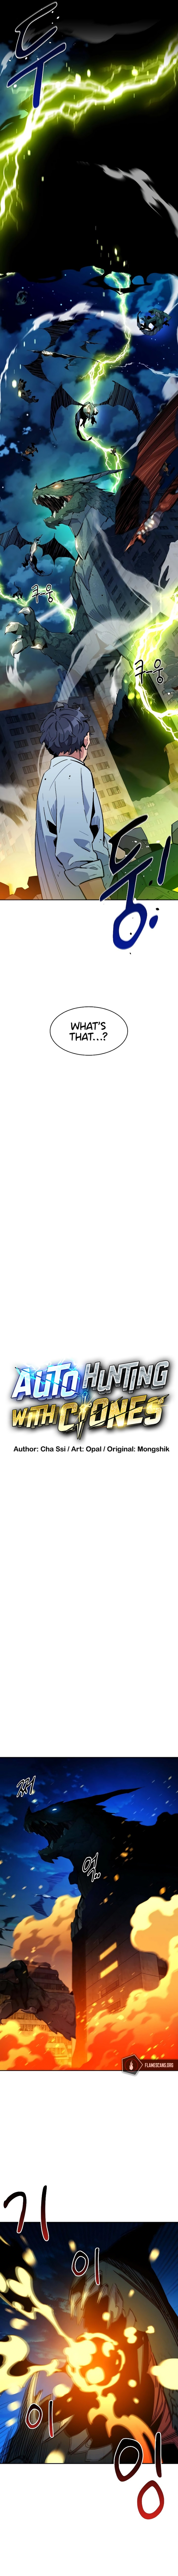 Auto-Hunting With Clones - Chapter 23 Page 4